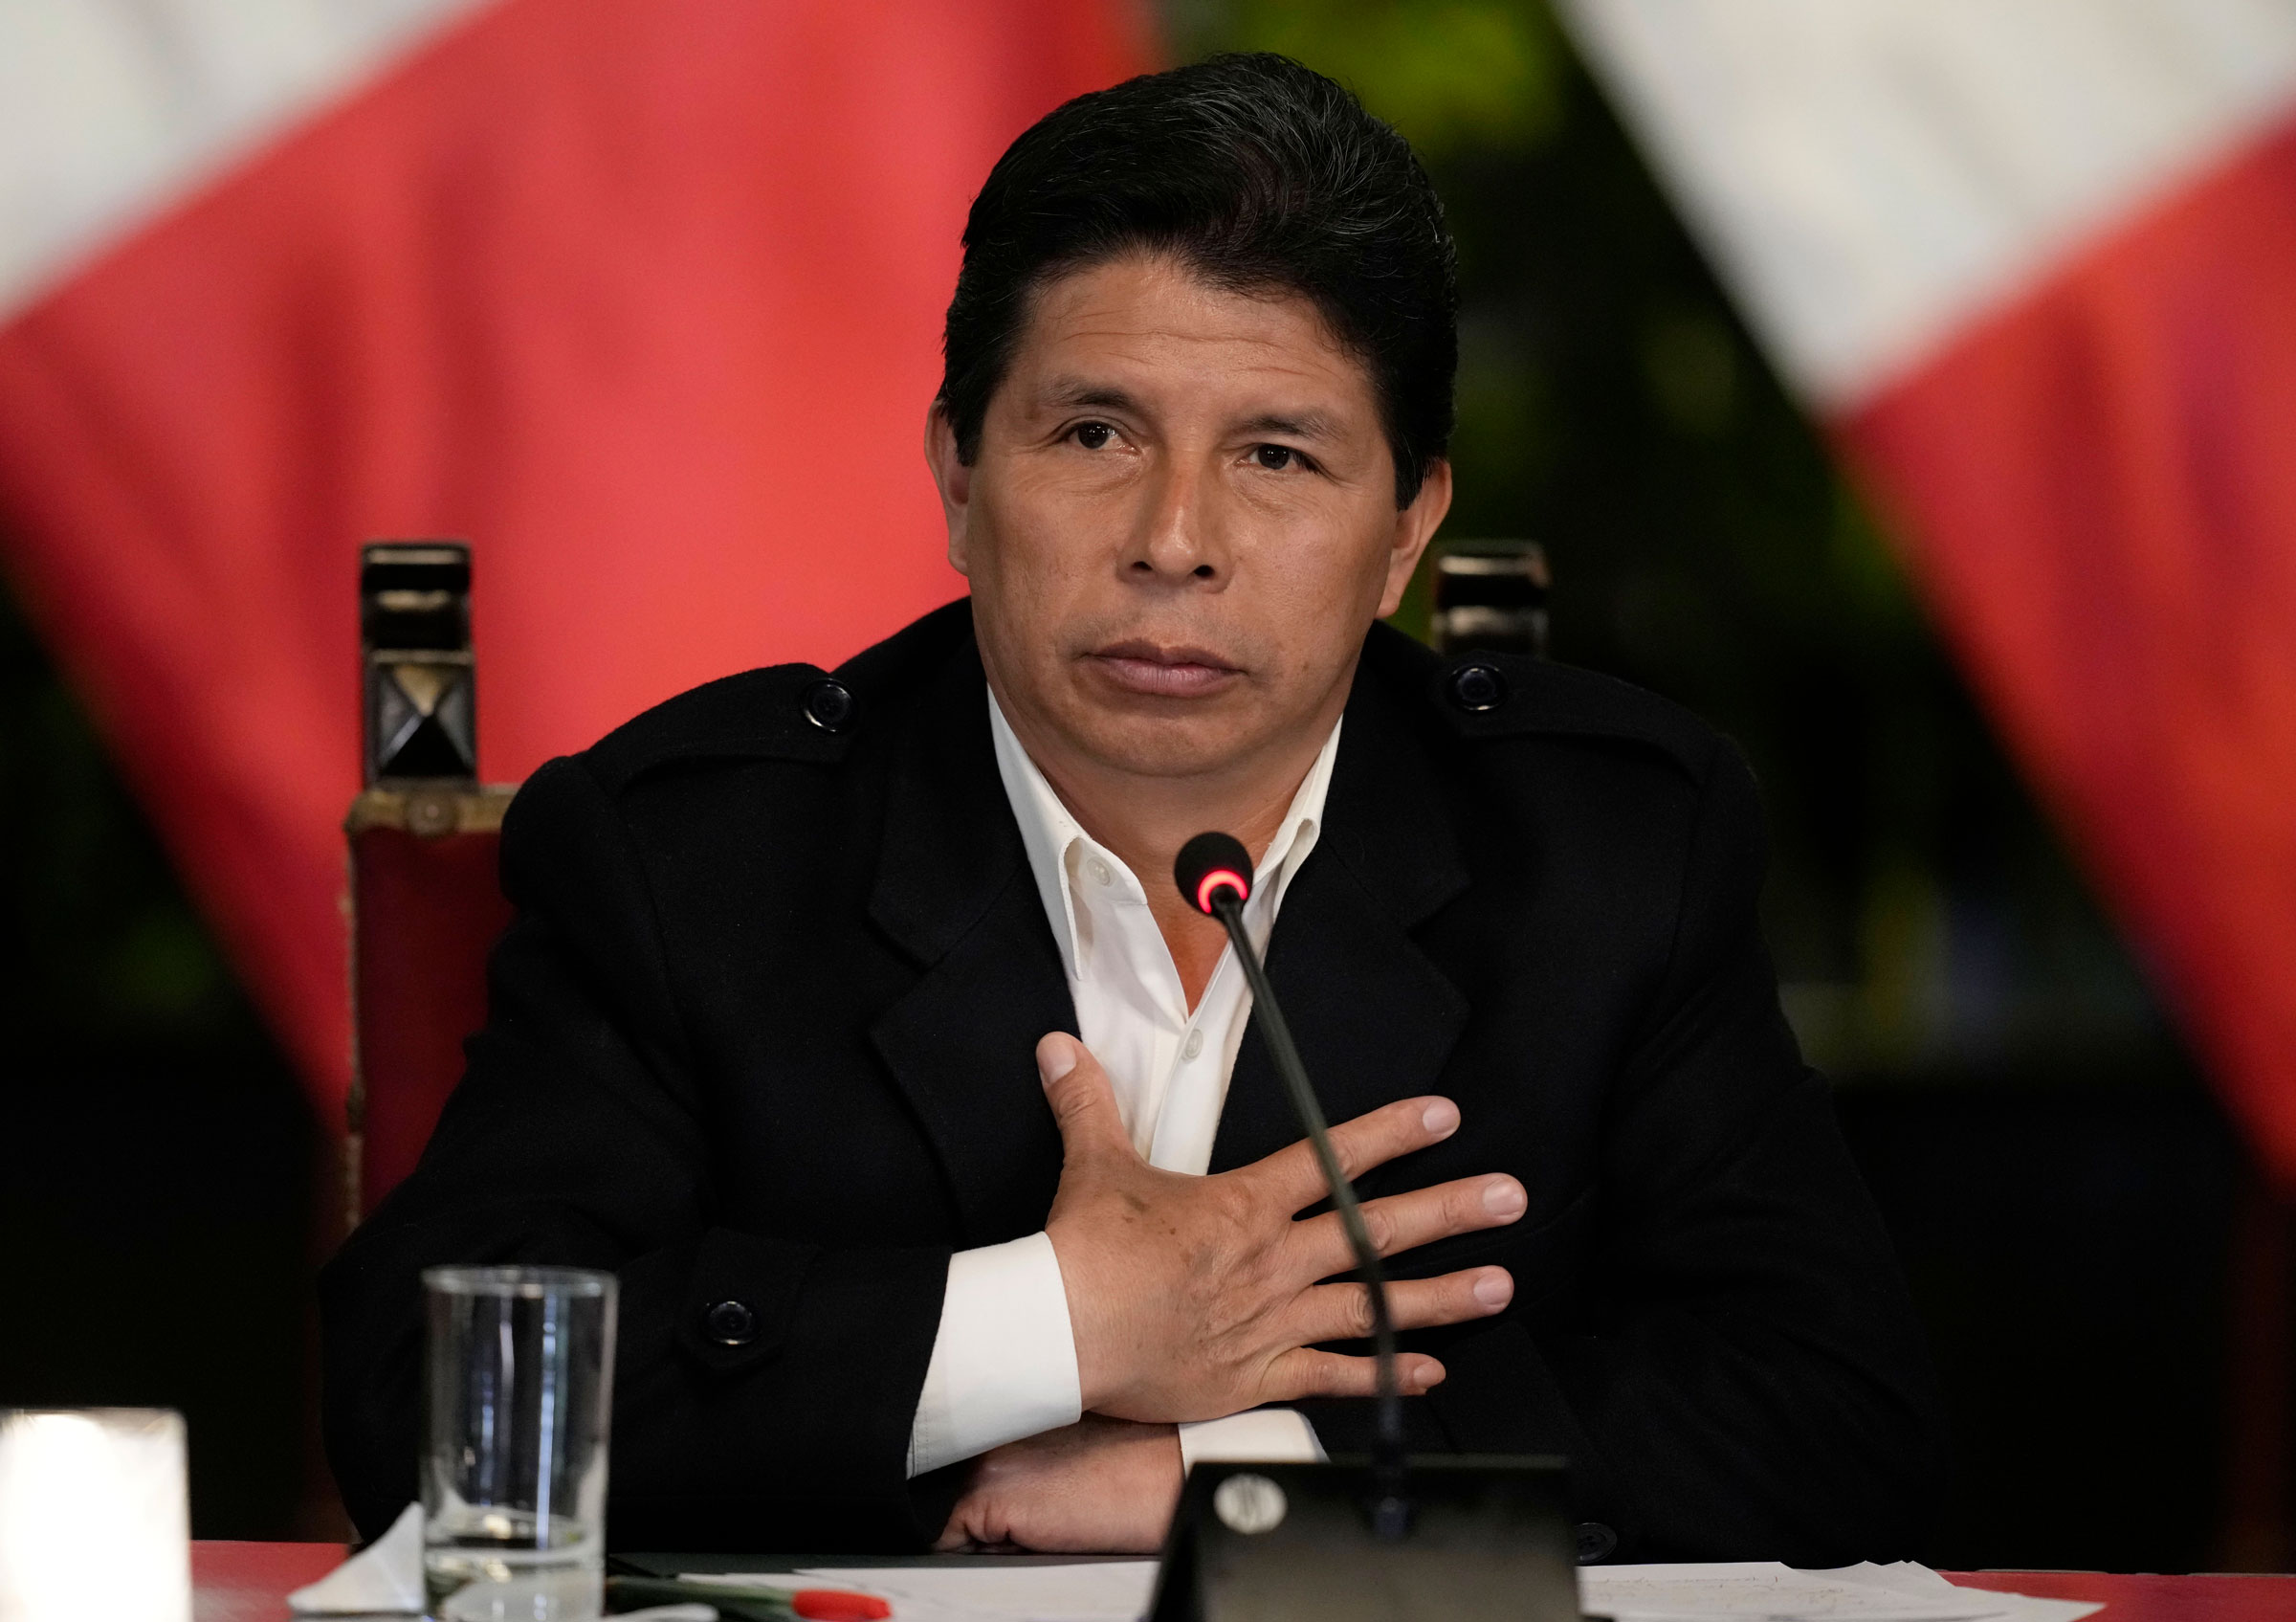 Peruvian President Pedro Castillo gives a press conference at the presidential palace in Lima on Oct. 11, 2022. (Martin Mejia—AP)